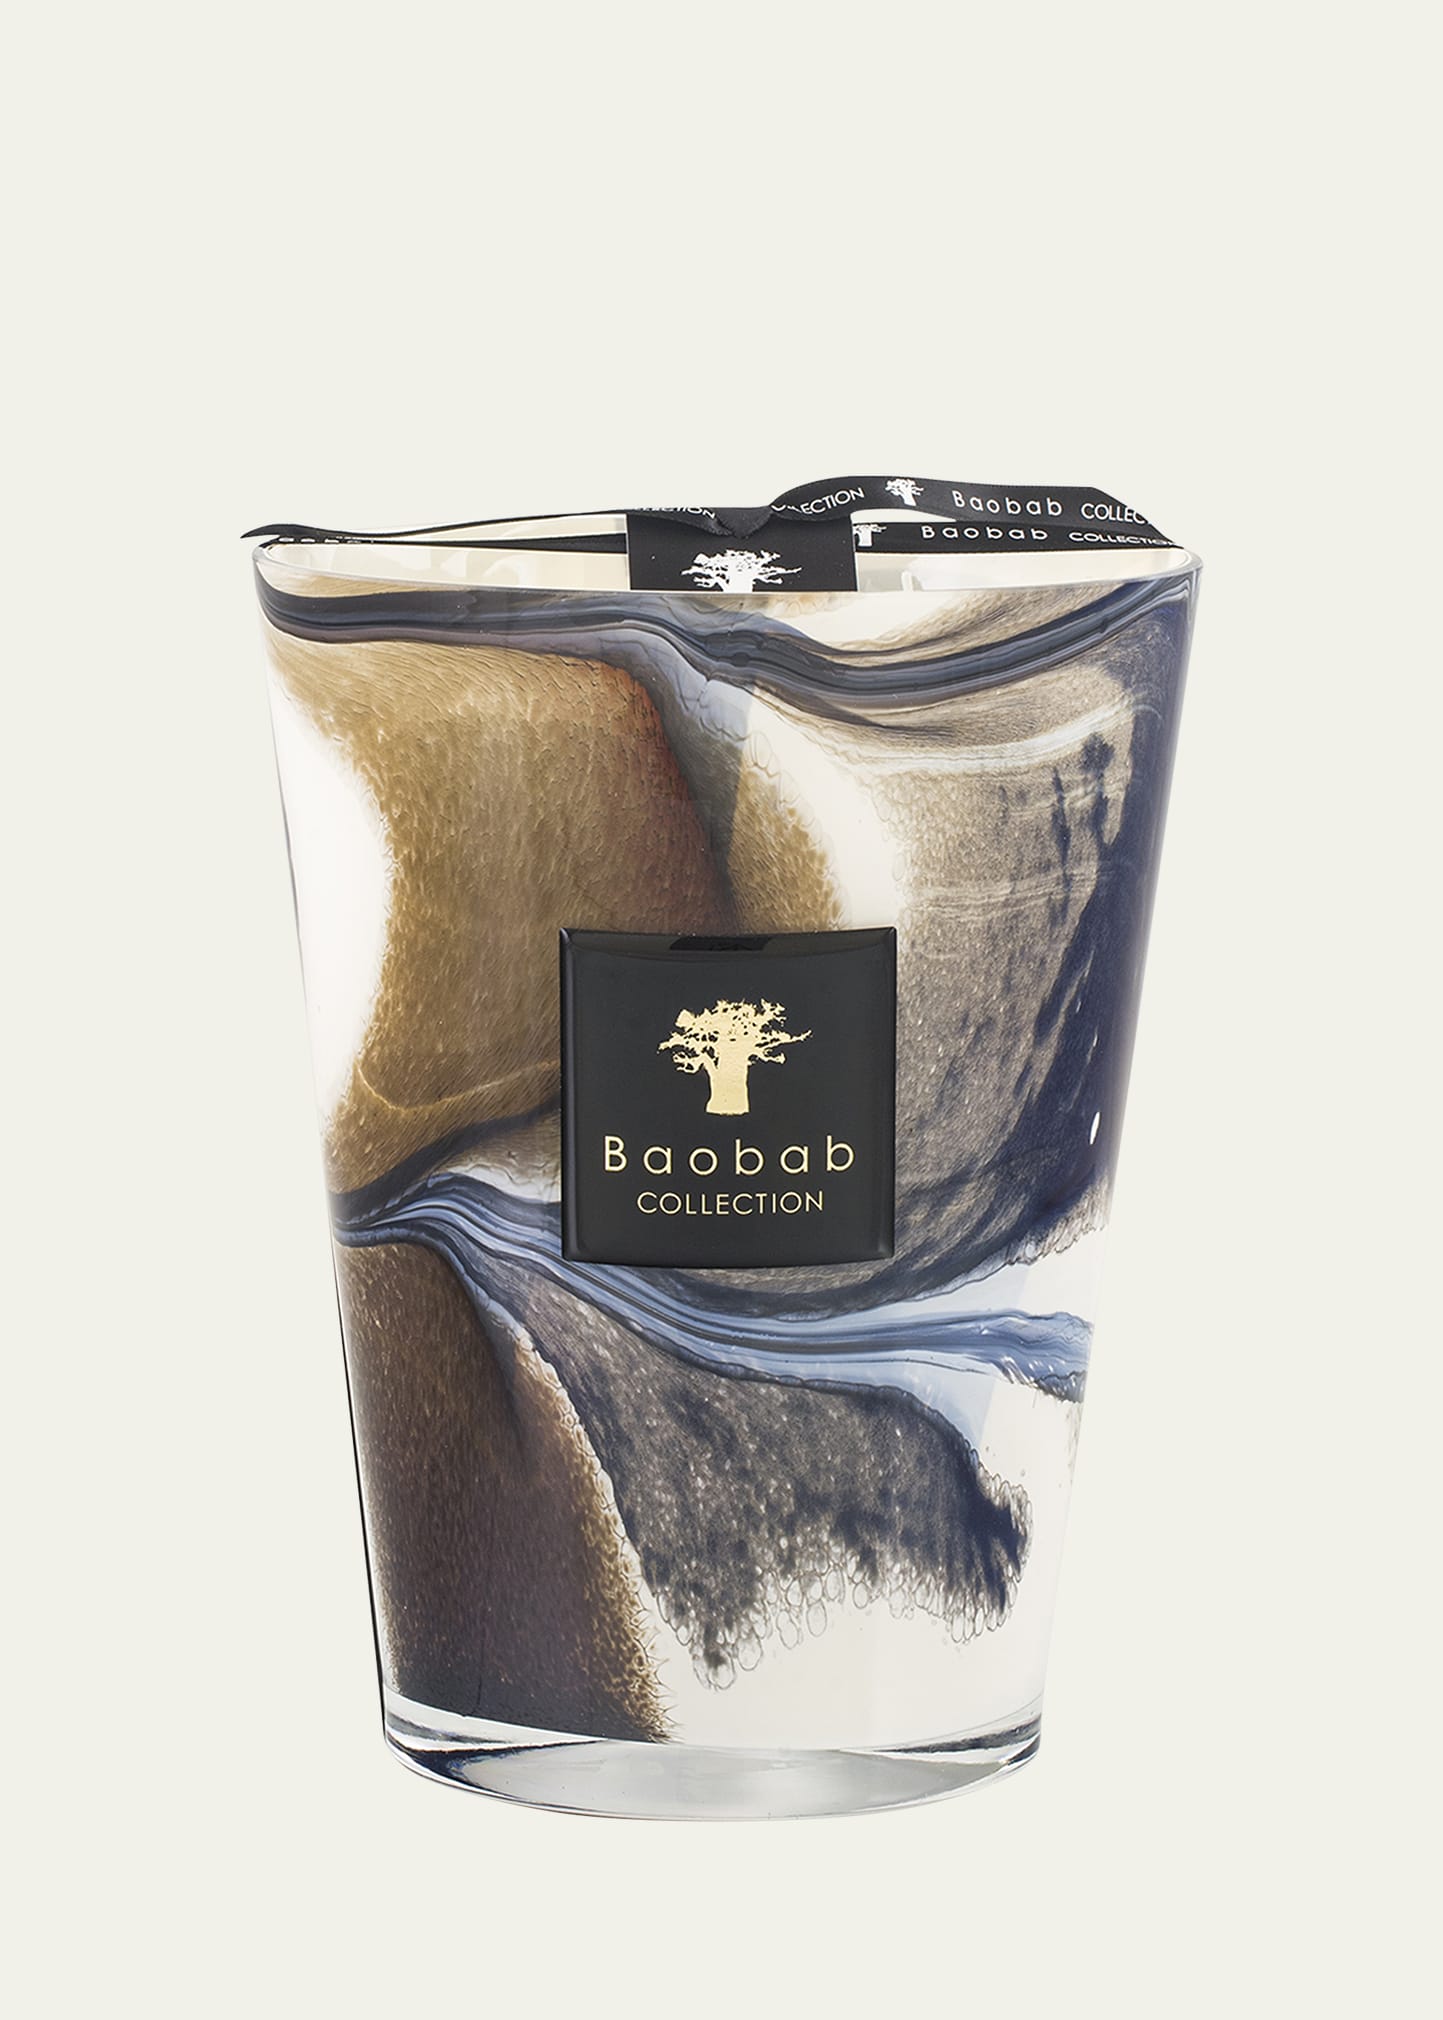 Baobab Collection Delta Nil 5-Wick Max24 Candle, 176.3 oz.